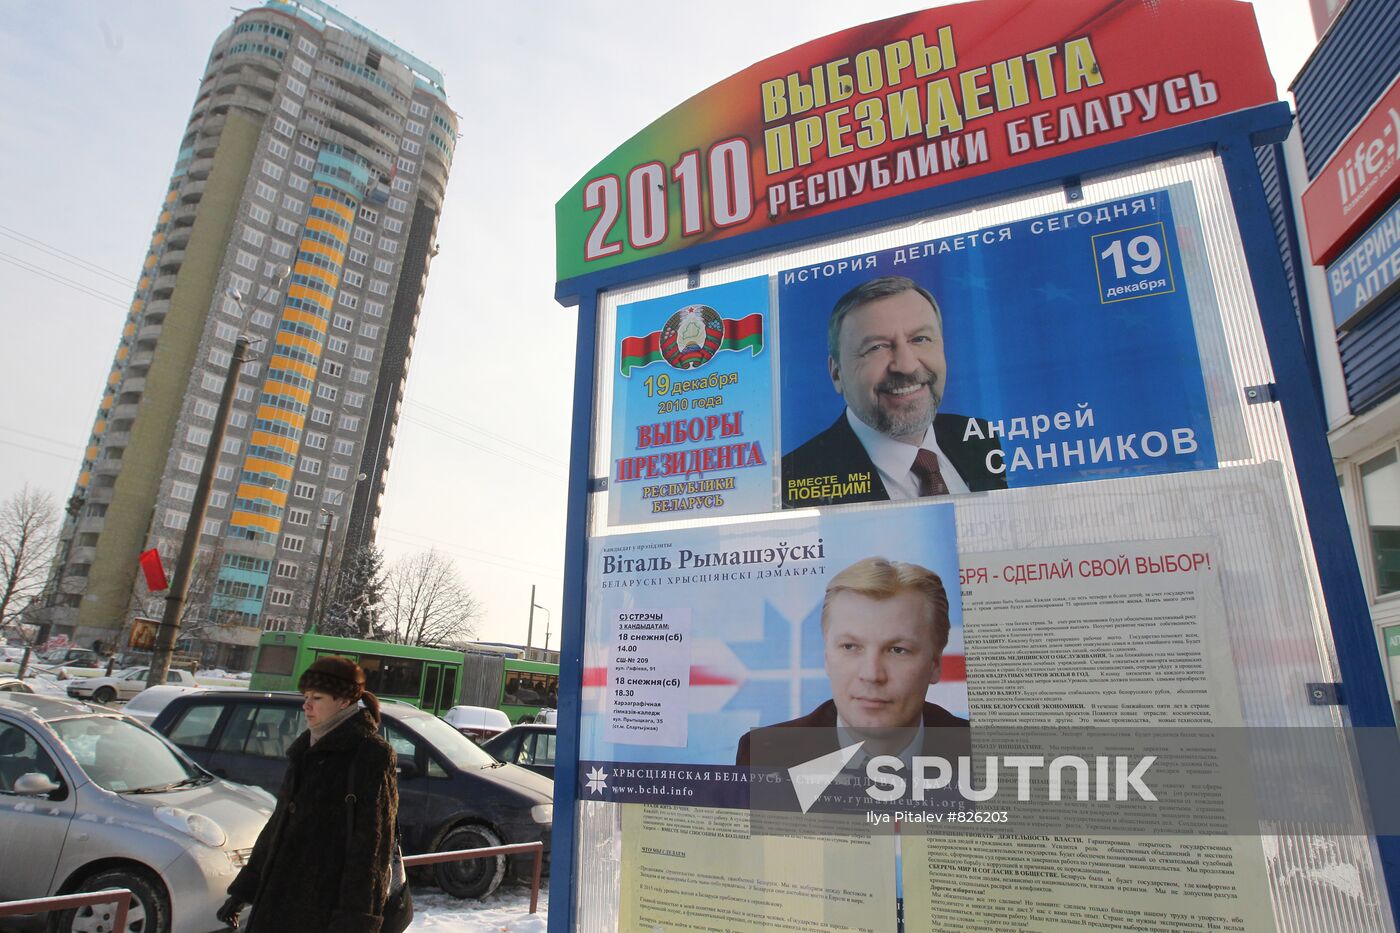 Stand with pre-election poster in a street of Minsk